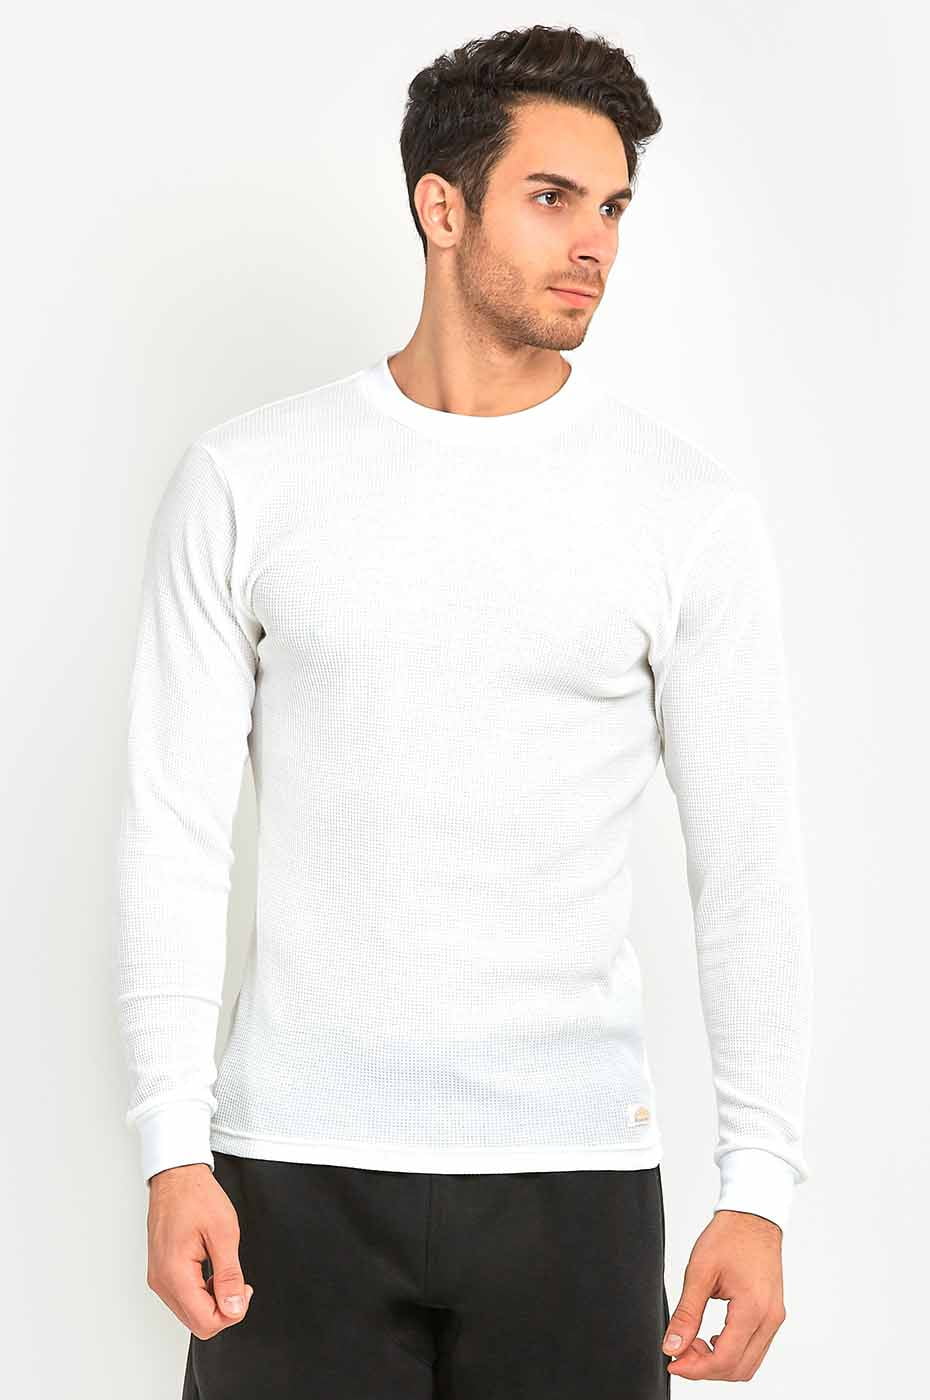 waffle thermal long sleeve shirt - OFF-64% >Free Delivery